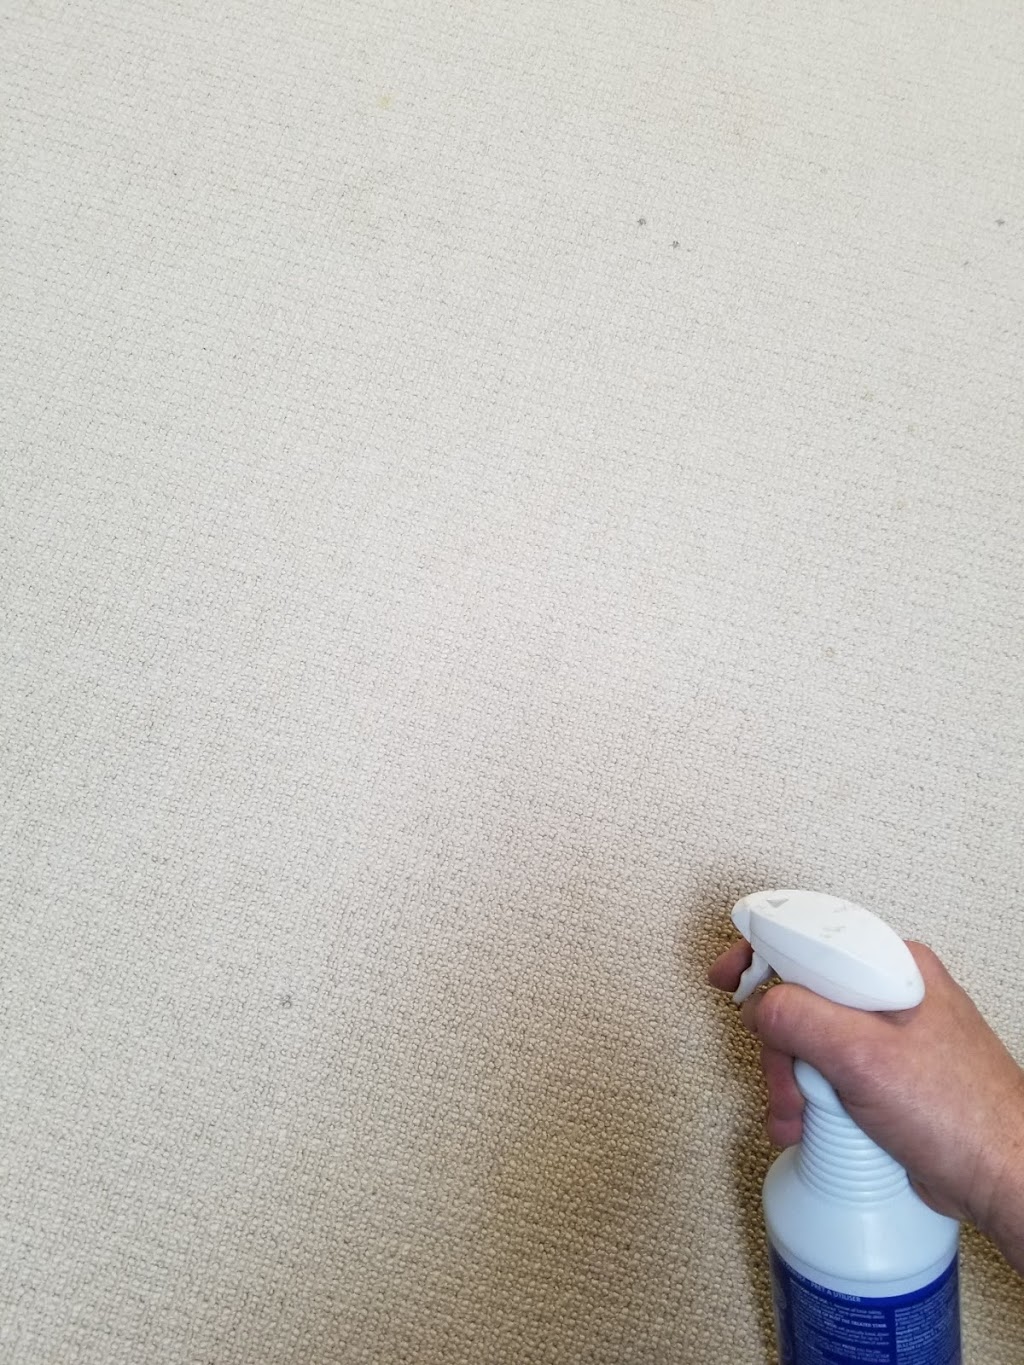 Oliva Carpet & Rug Cleaning | 1500 Upper Middle Rd W, Oakville, ON L6M 3G3, Canada | Phone: (905) 827-4554